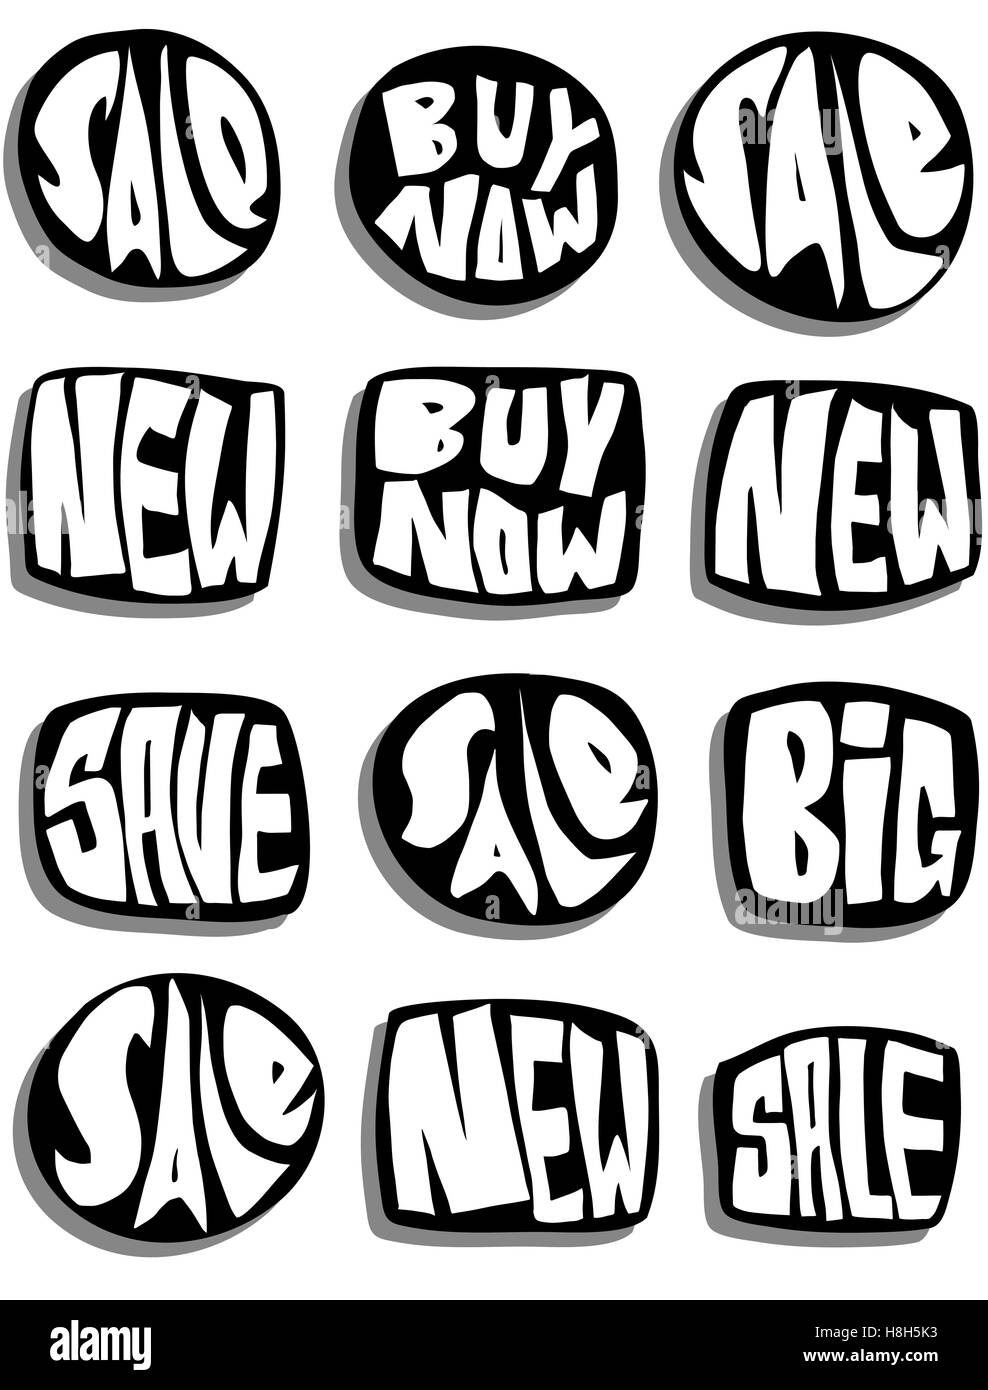 marketing sale slogan button collection over white with shadow Stock Vector